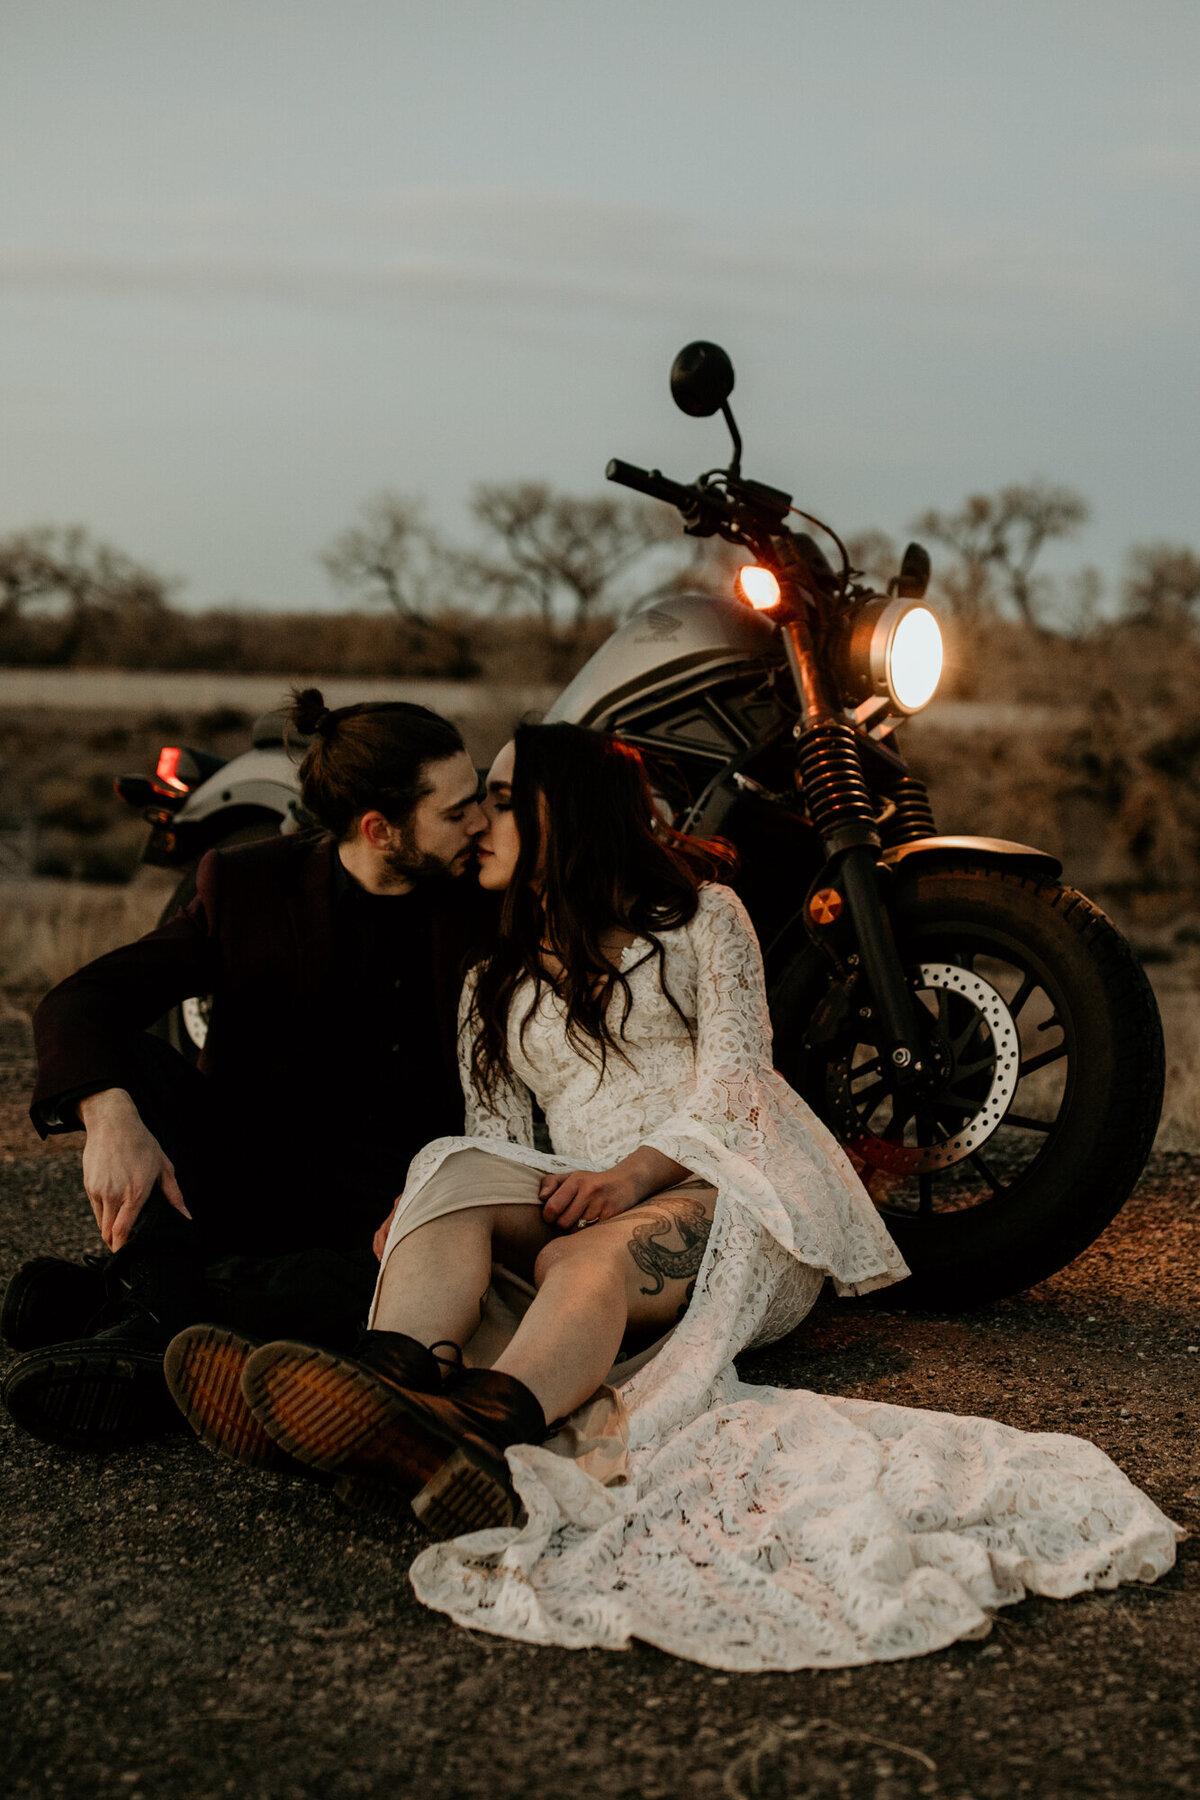 husband and wife sitting against a motorcycle